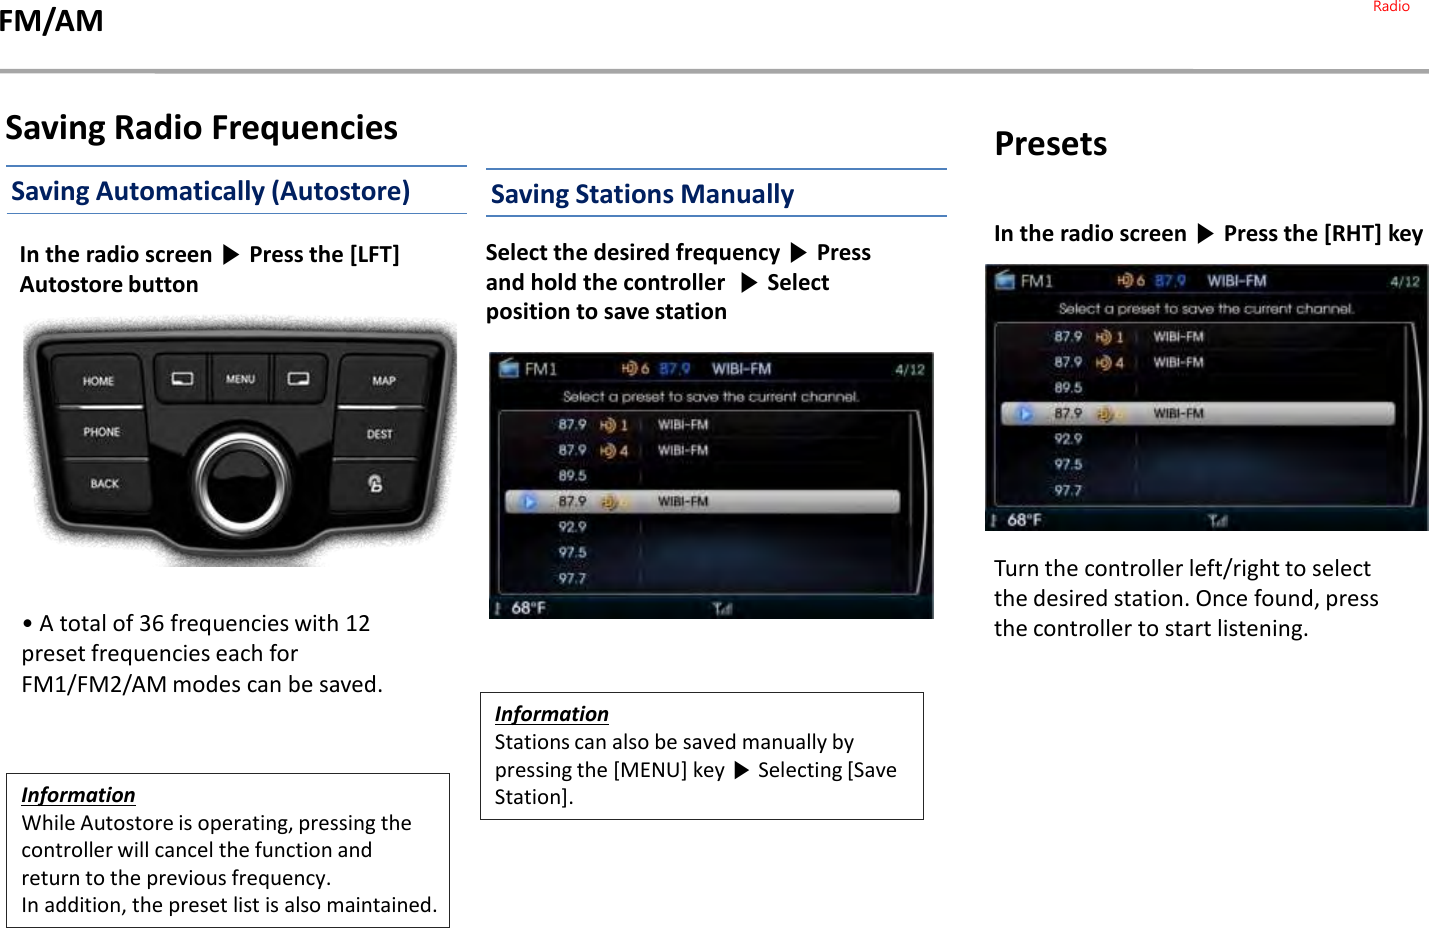 In the radio screen ▶Press the [LFT] Autostore button• A total of 36 frequencies with 12 preset frequencies each for FM1/FM2/AM modes can be saved.InformationWhile Autostore is operating, pressing the controller will cancel the function and return to the previous frequency.In addition, the preset list is also maintained.Saving Radio FrequenciesSaving Automatically (Autostore)Select the desired frequency ▶Press and hold the controller  ▶Select position to save stationInformationStations can also be saved manually by pressing the [MENU] key ▶Selecting [Save Station].Saving Stations ManuallyIn the radio screen ▶Press the [RHT] keyPresetsTurn the controller left/right to select the desired station. Once found, press the controller to start listening.FM/AM Radio